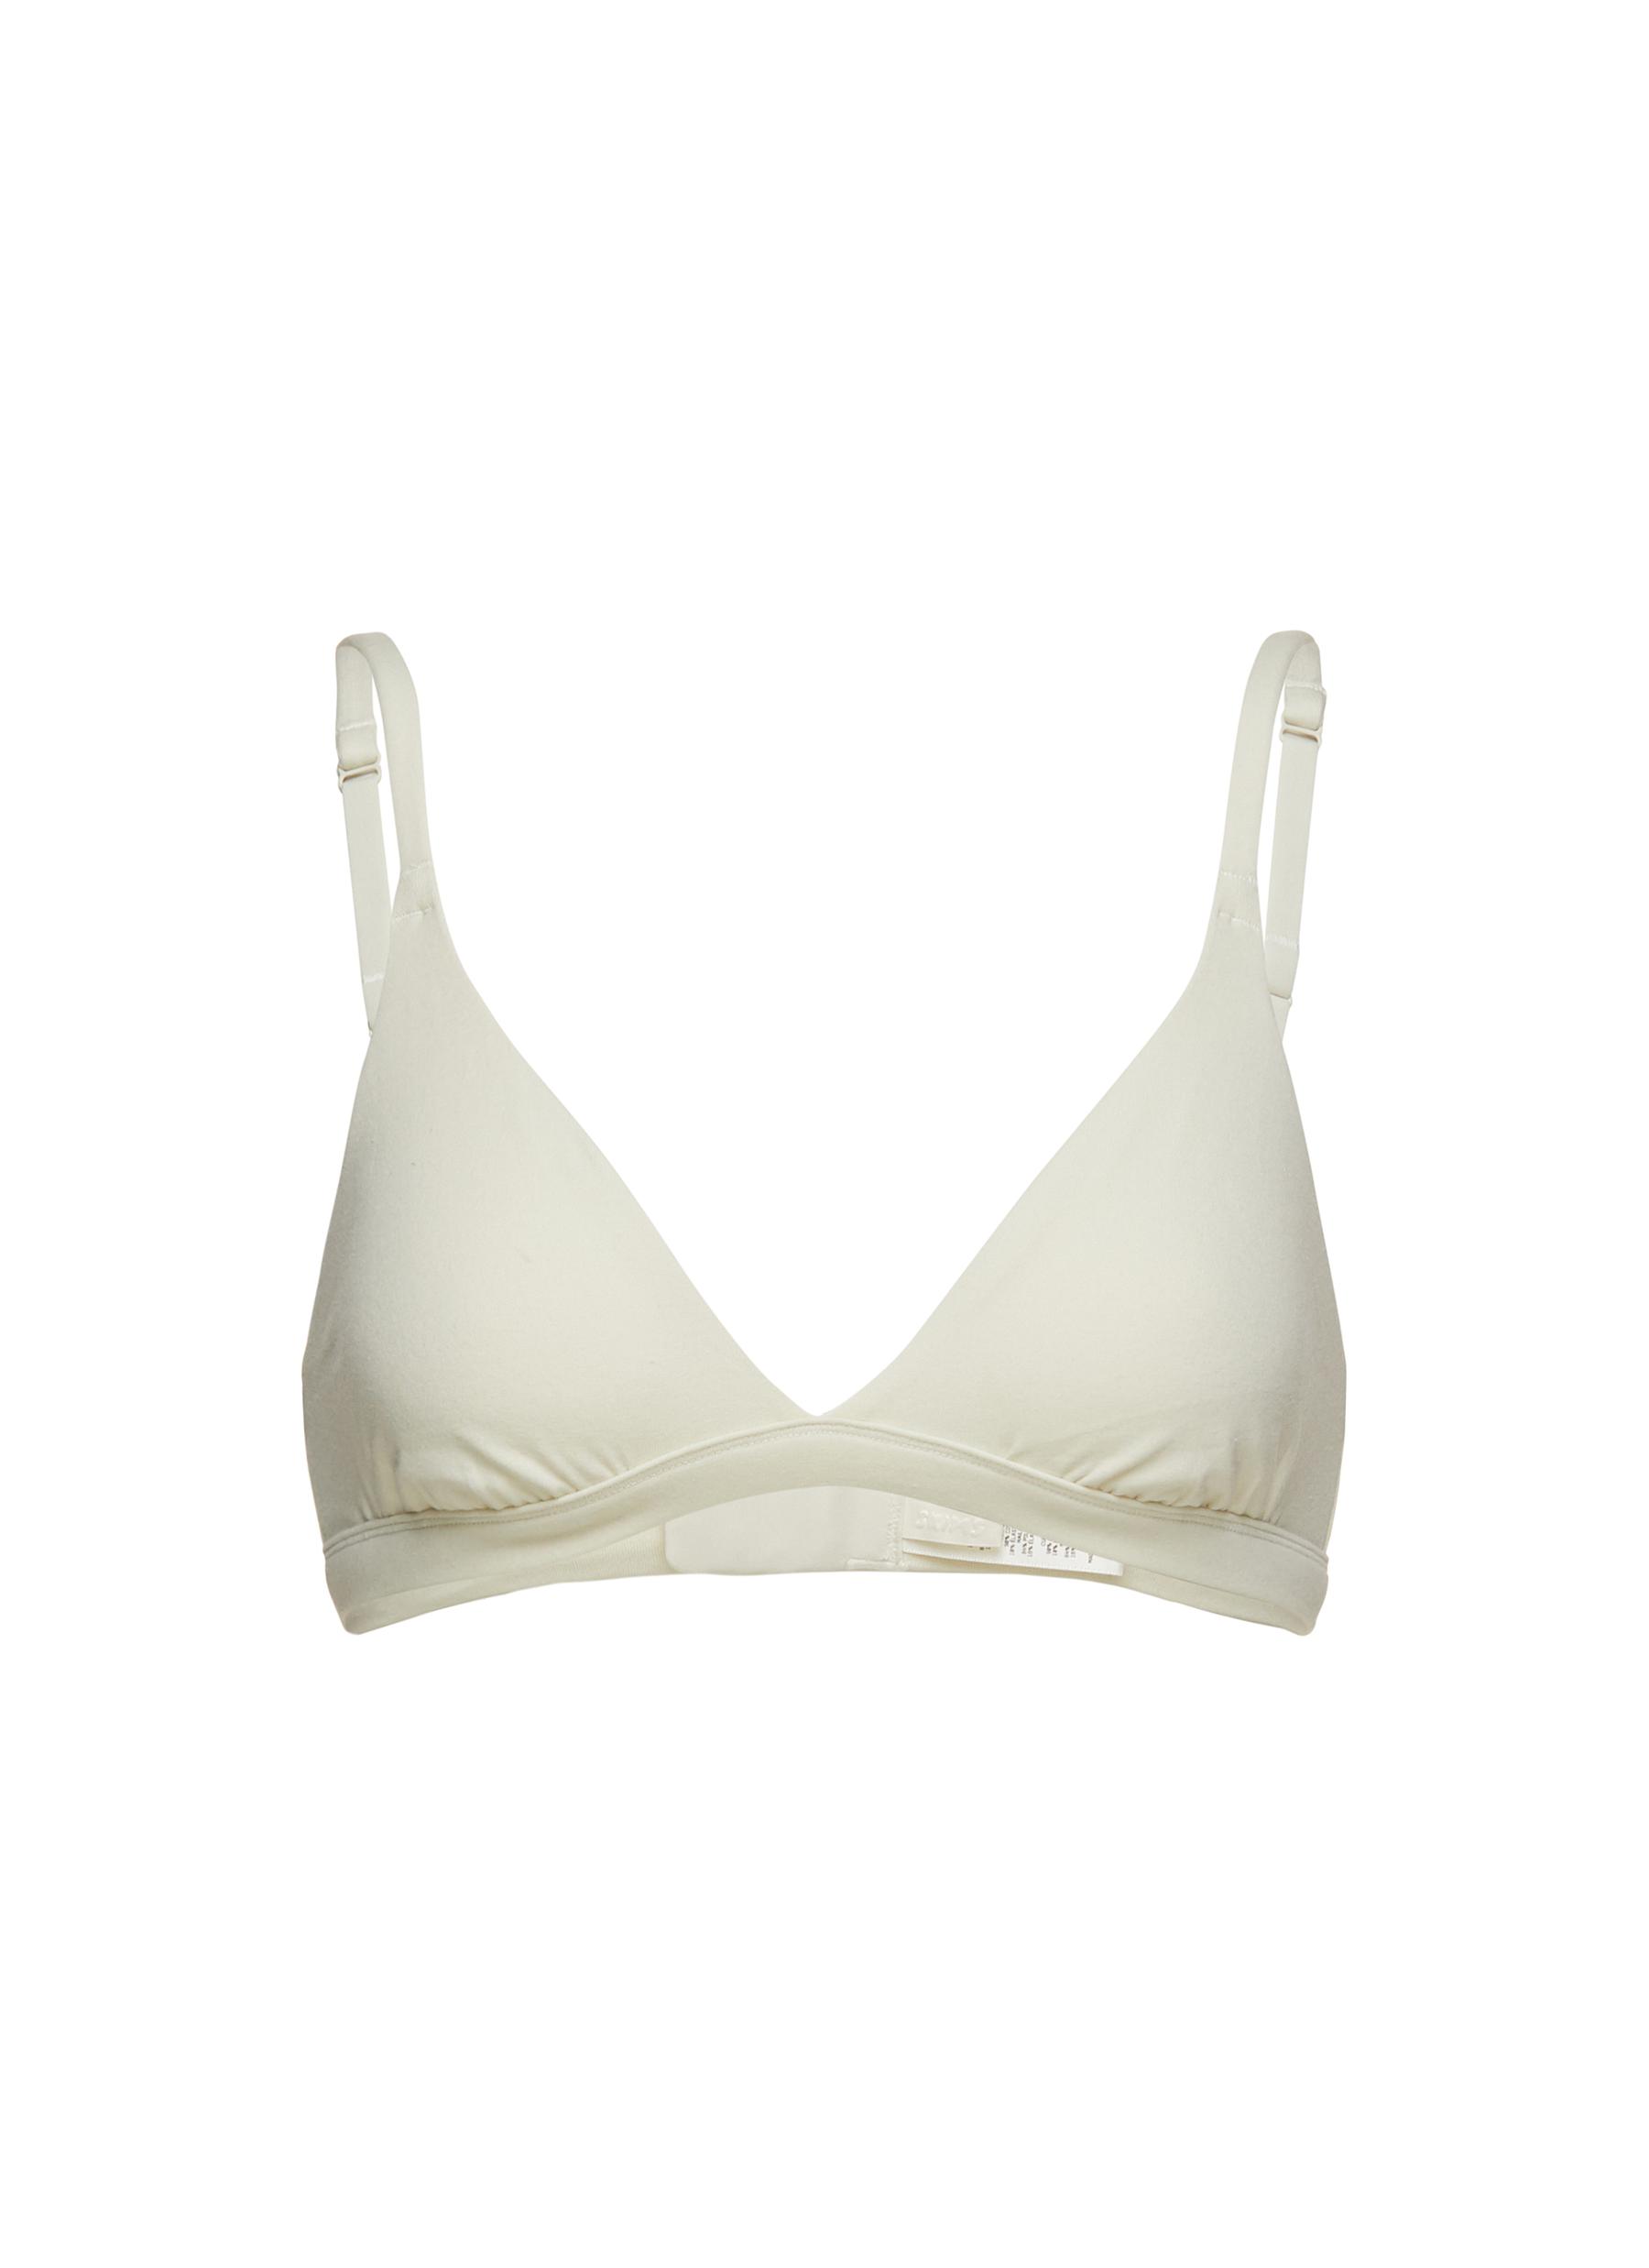 SKIMS - Classic and comfortable, the Cotton Triangle Bralette is